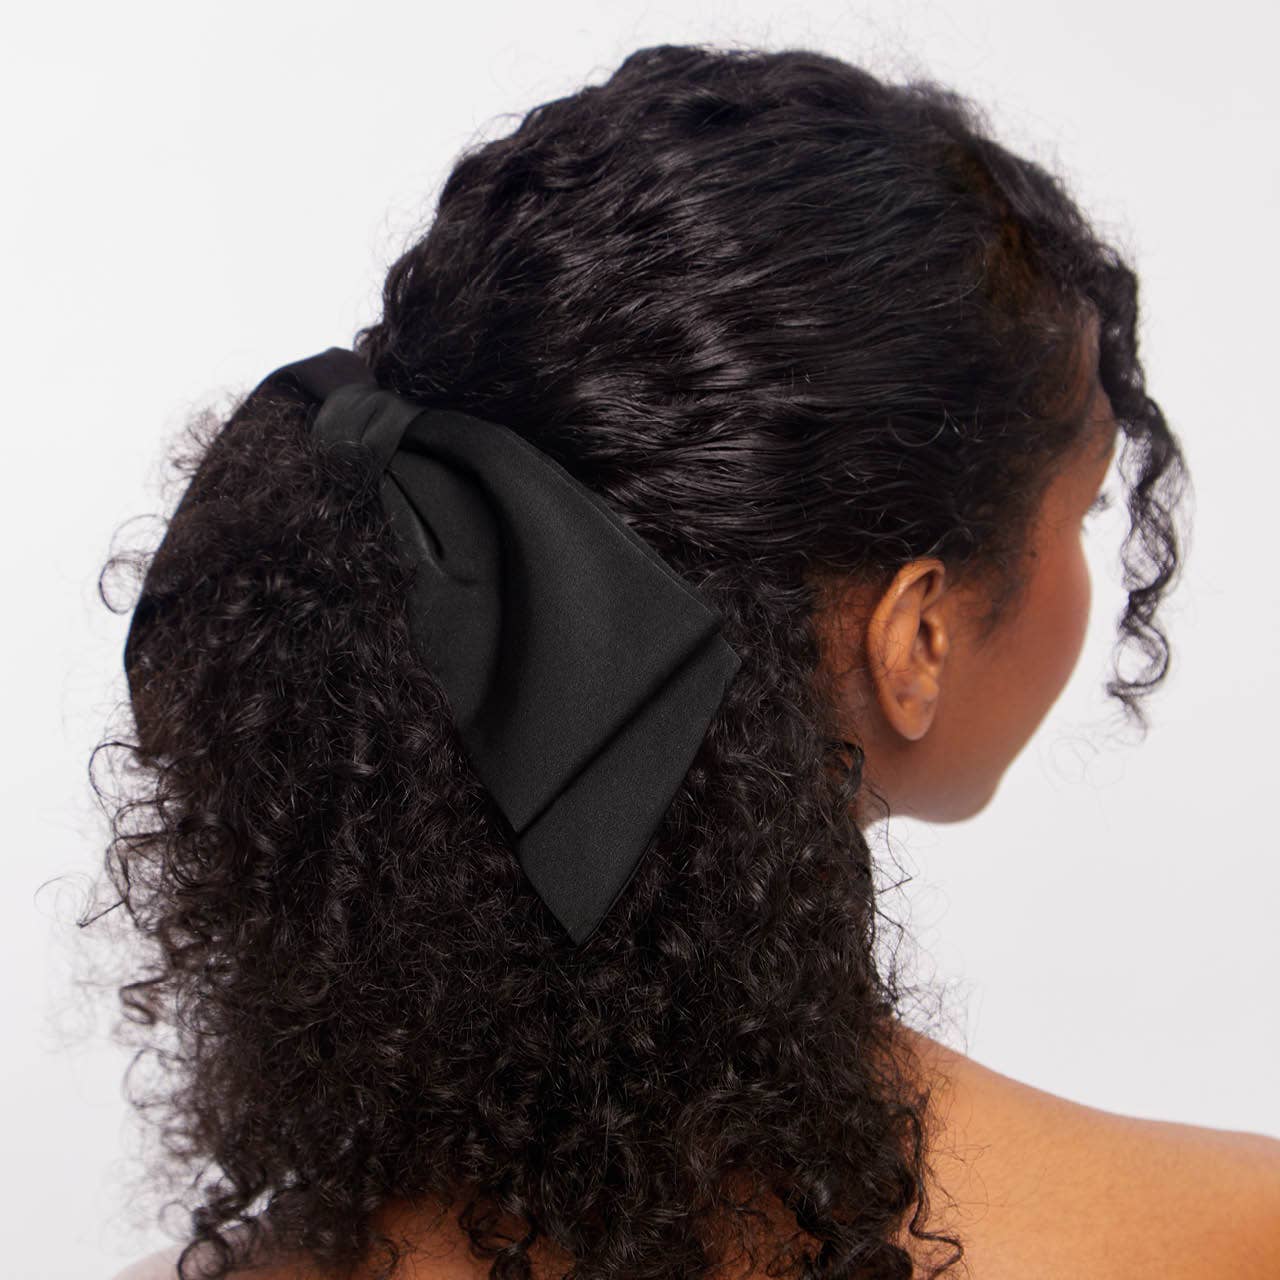 KITSCH - Recycled Fabric Bow Hair Clip 1pc- Black